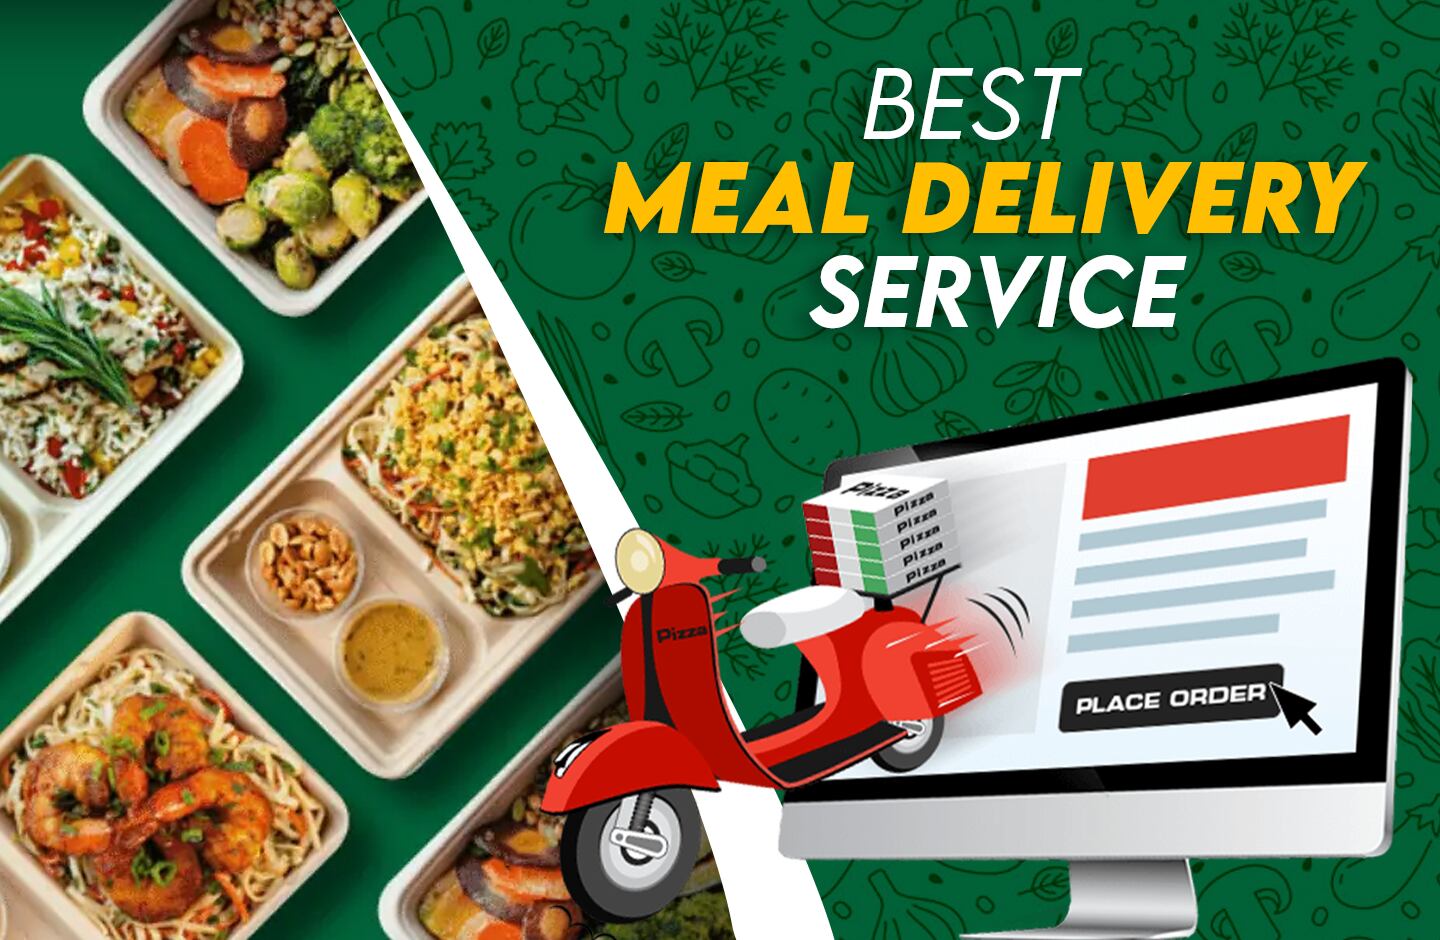 Meal delivery service. In Washington D.C., Maryland MD, & Virginia VA –  Dinners At Your Door